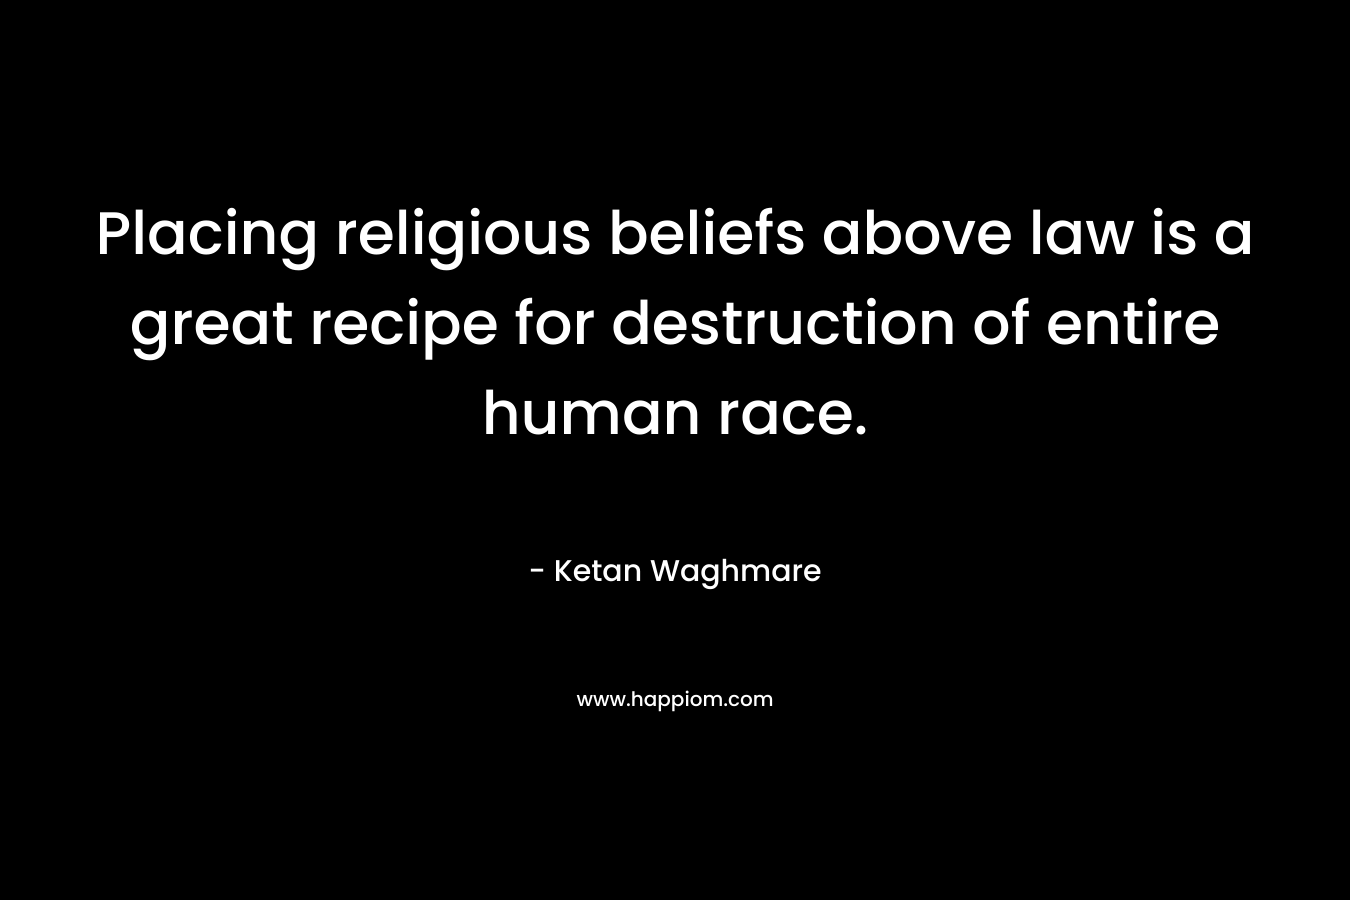 Placing religious beliefs above law is a great recipe for destruction of entire human race. – Ketan Waghmare